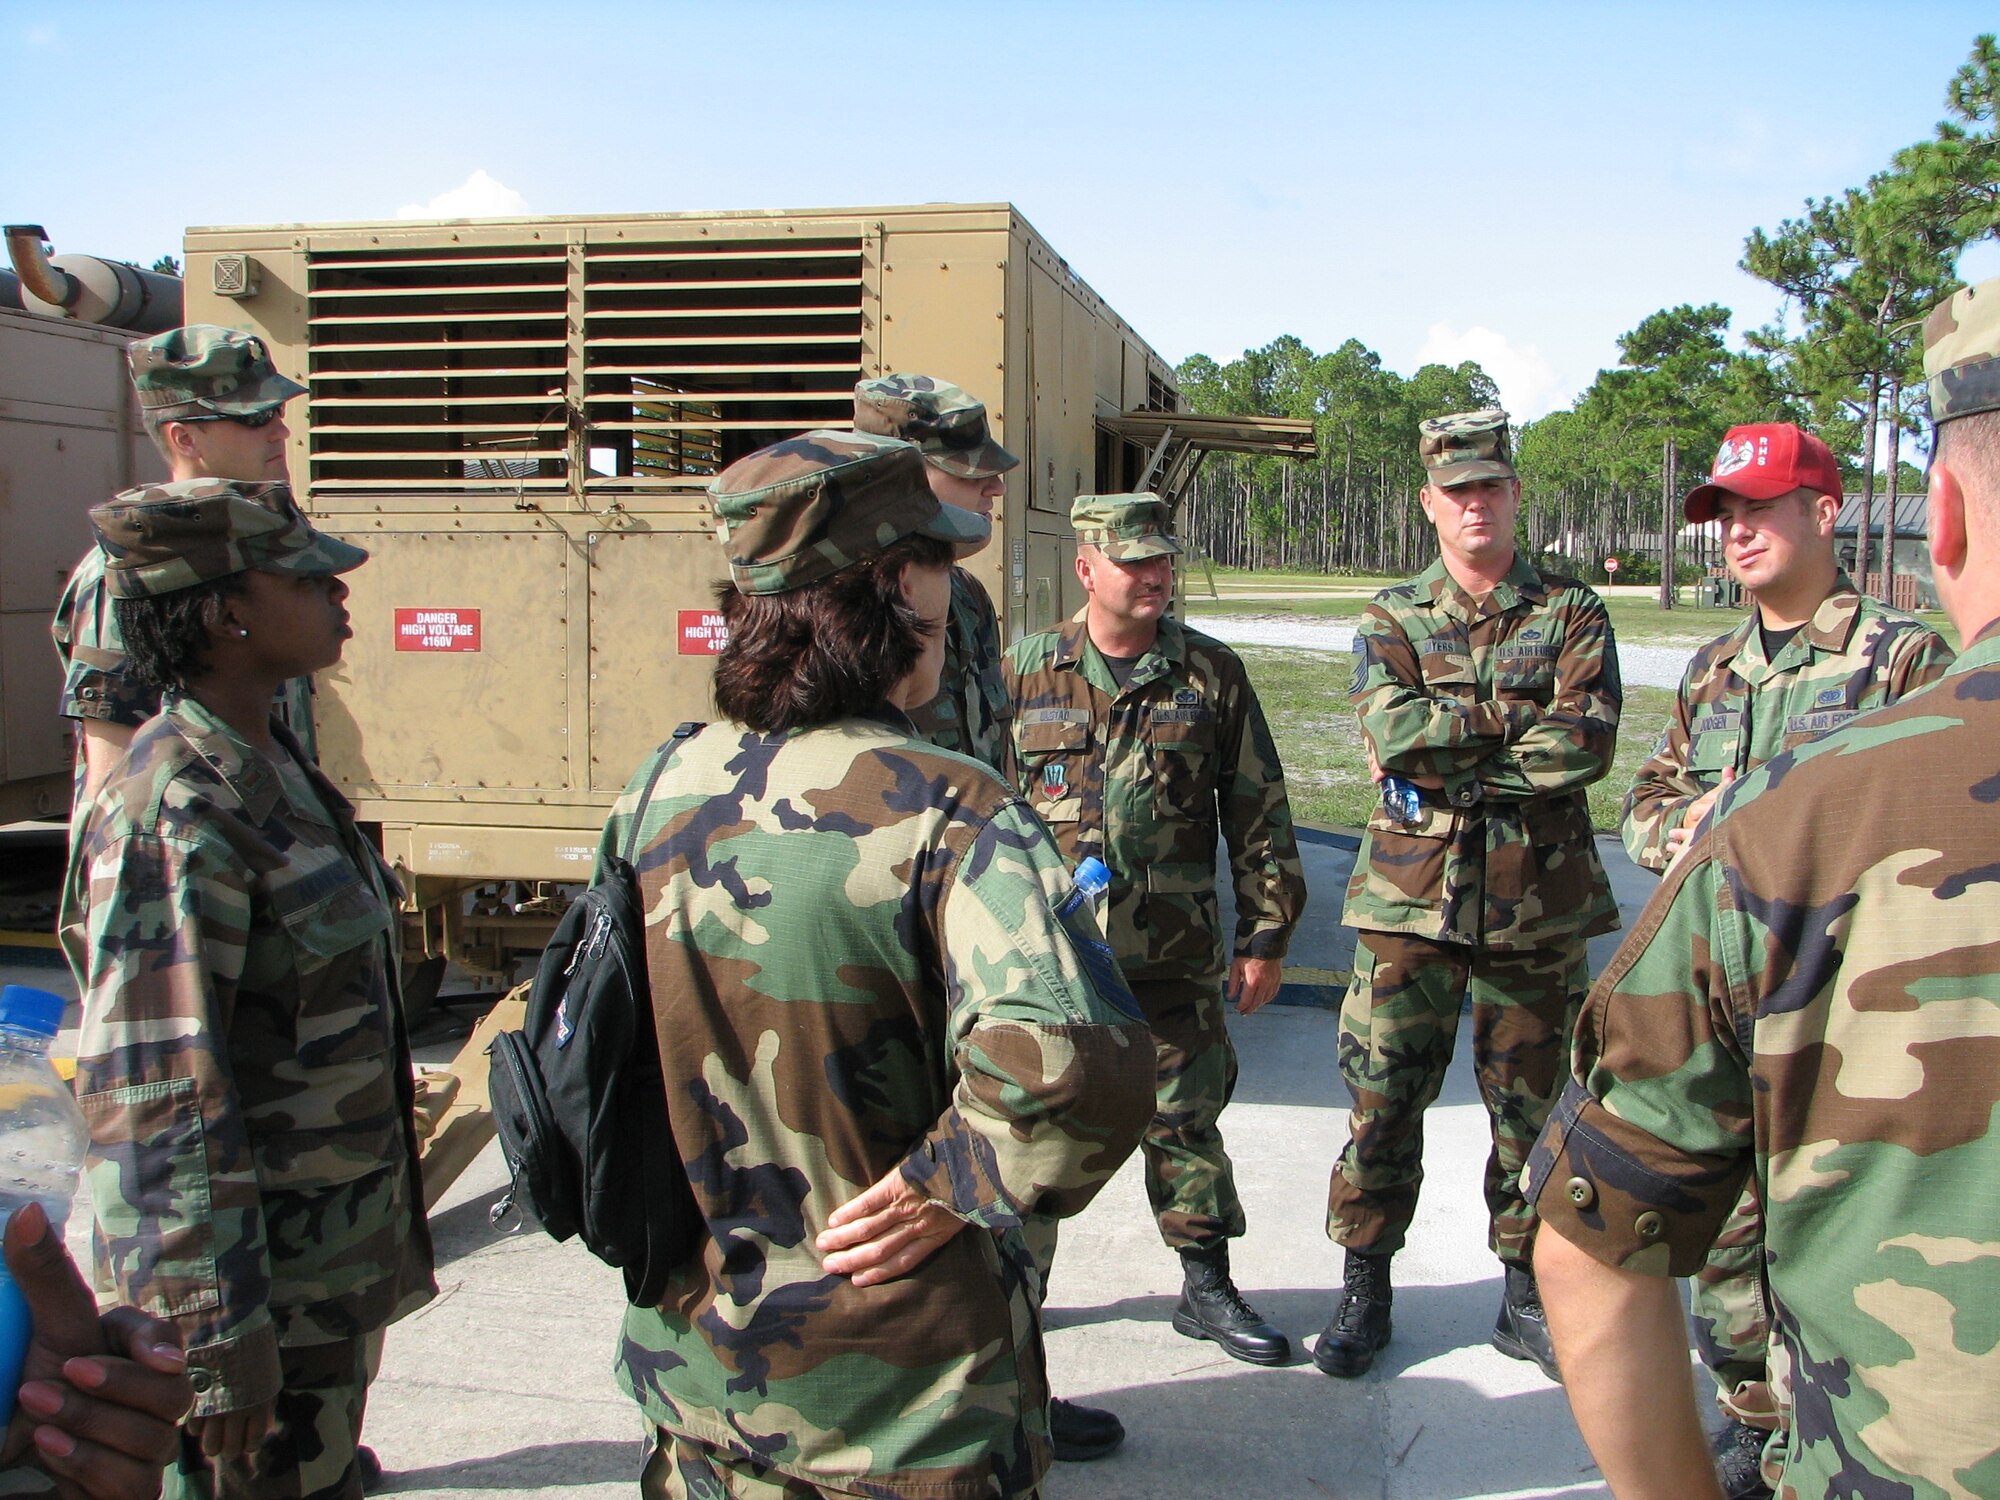 A Red Horse Squadron instructor teaches 163 RW Civil Engineers prior to a scenario start. Facing front, left to right, Chief Master Sgt. Donald Ulstad and Chief Master Sgt. Jeffrey Myers. The team participated in Silver Flag, held at Tyndall Air Force Base, Fla. About 40 members from the Civil Engineering Squadron deployed July 14-20 working alongside Air Force active-duty and Reserve.  (U.S. Air Force photo)